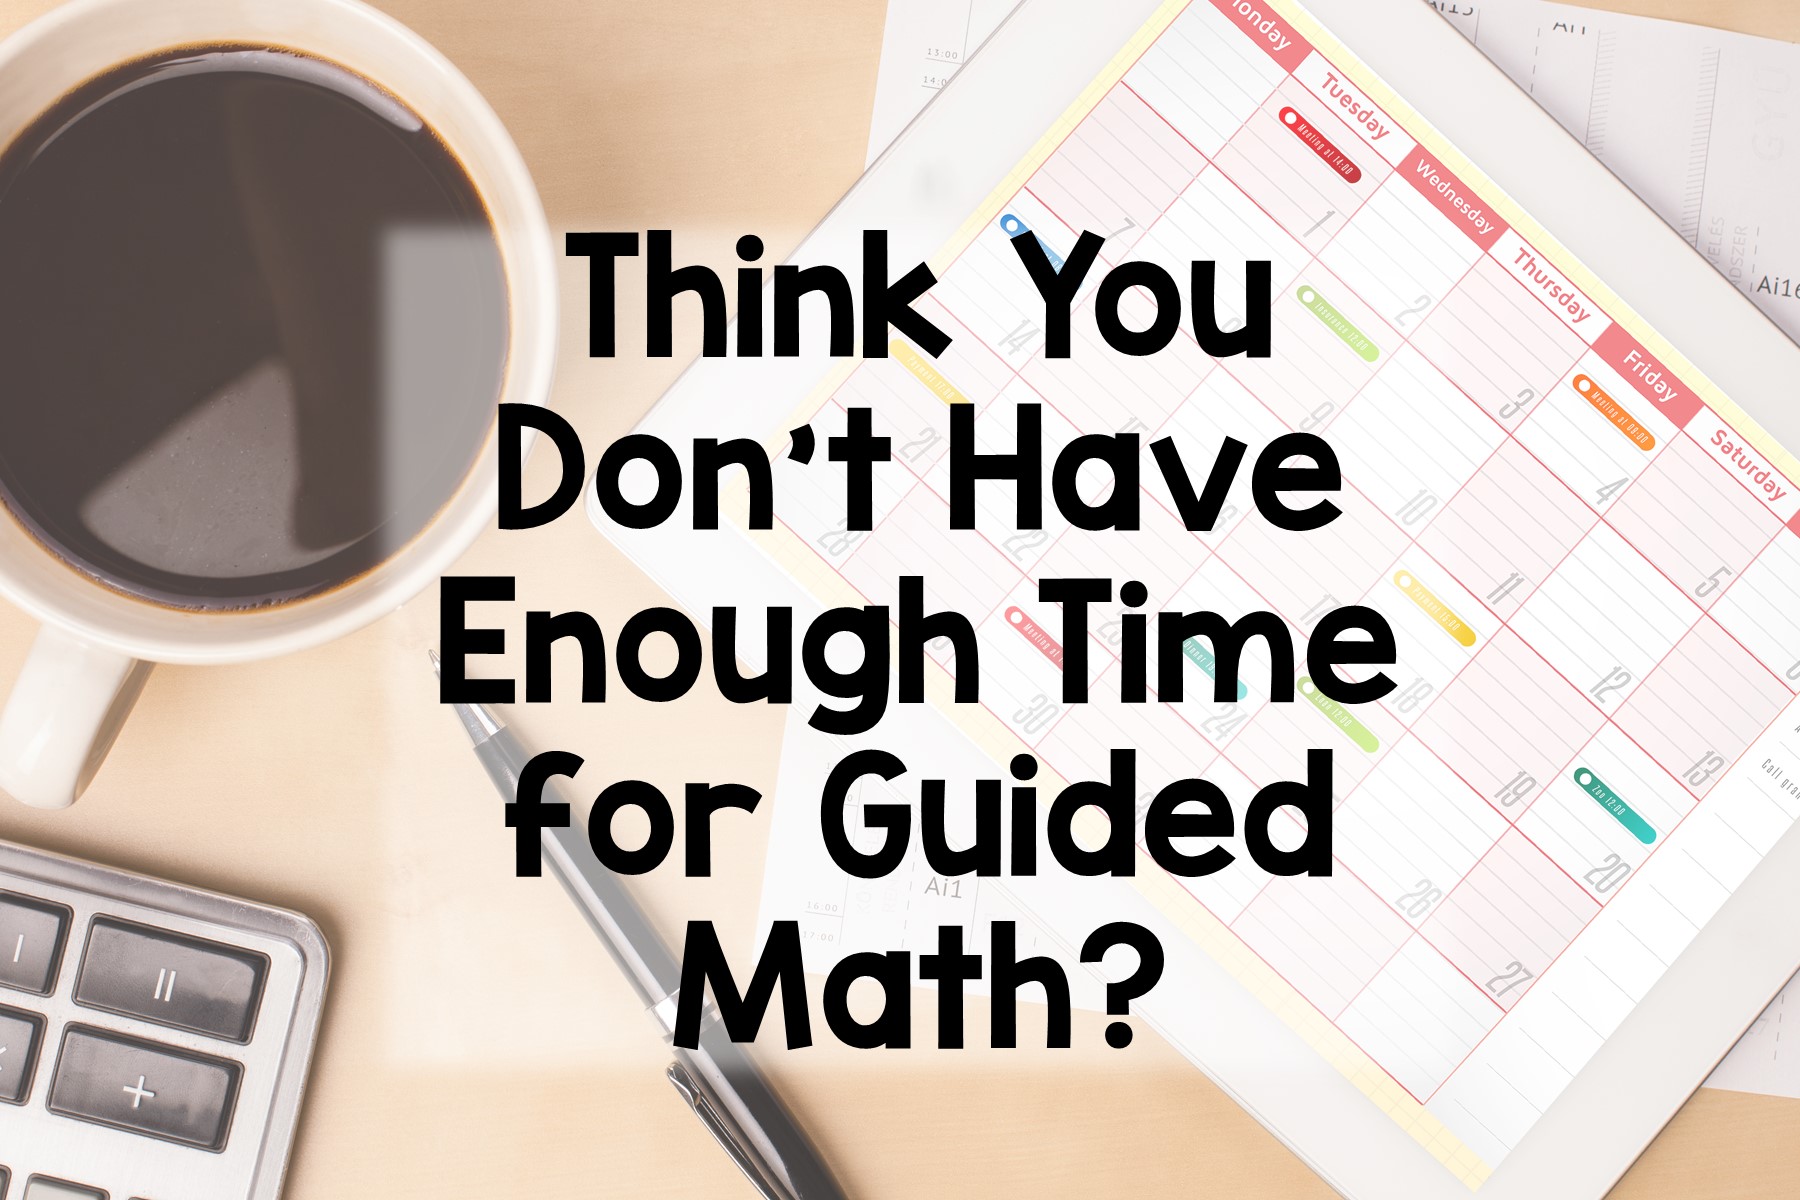 Think You Don't Have Time for Guided Math?